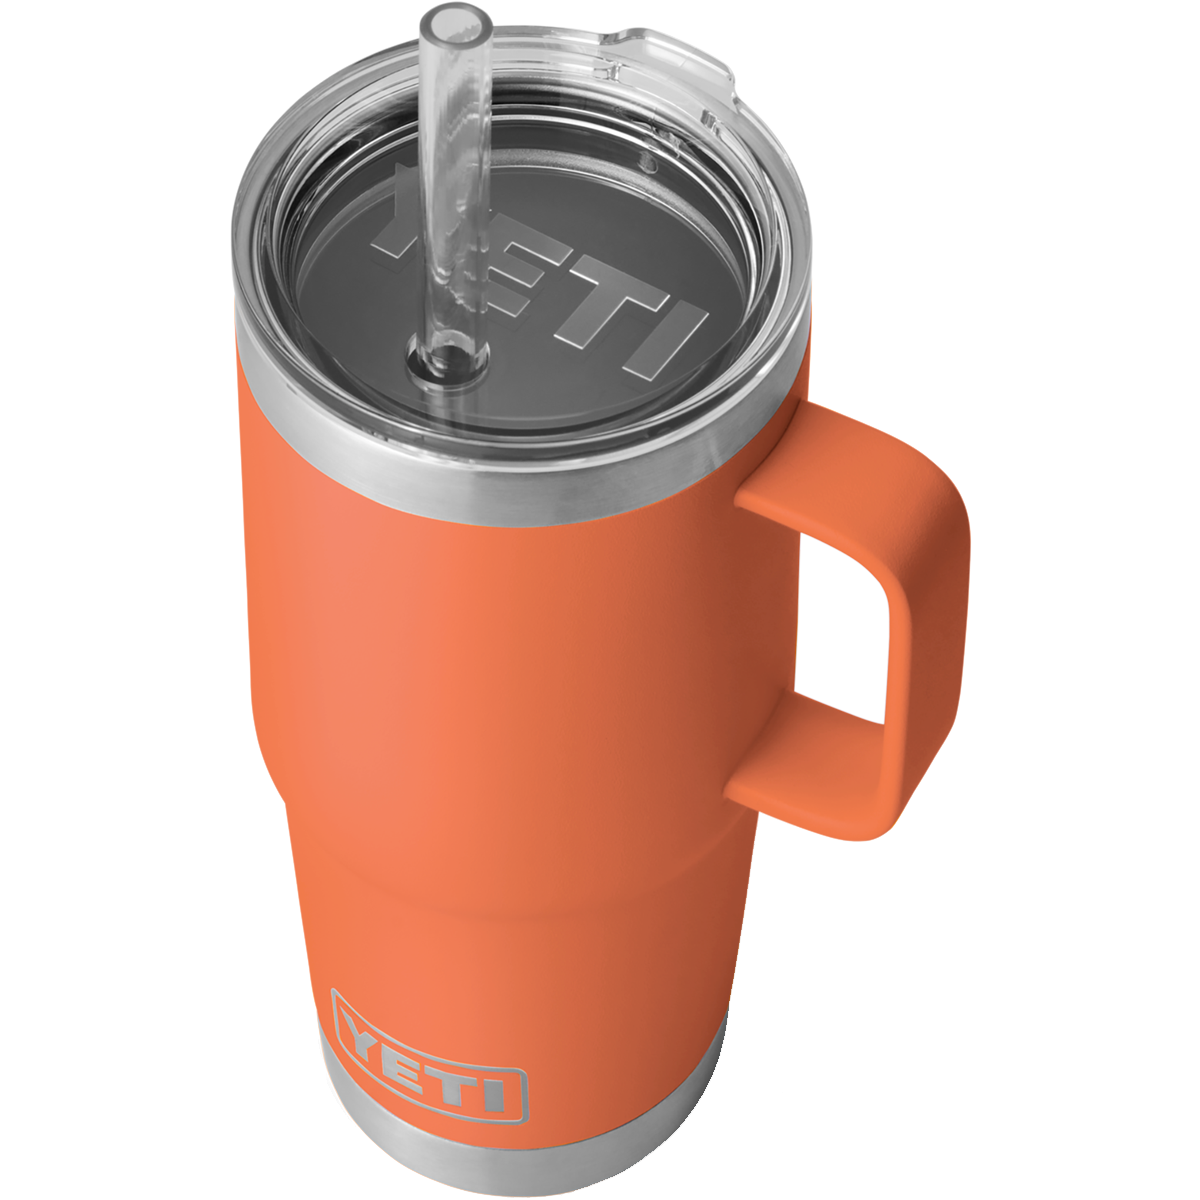 YETI 25oz Mug with Handle & Straw Lid; LE Colors: New, Pick your Favorite!